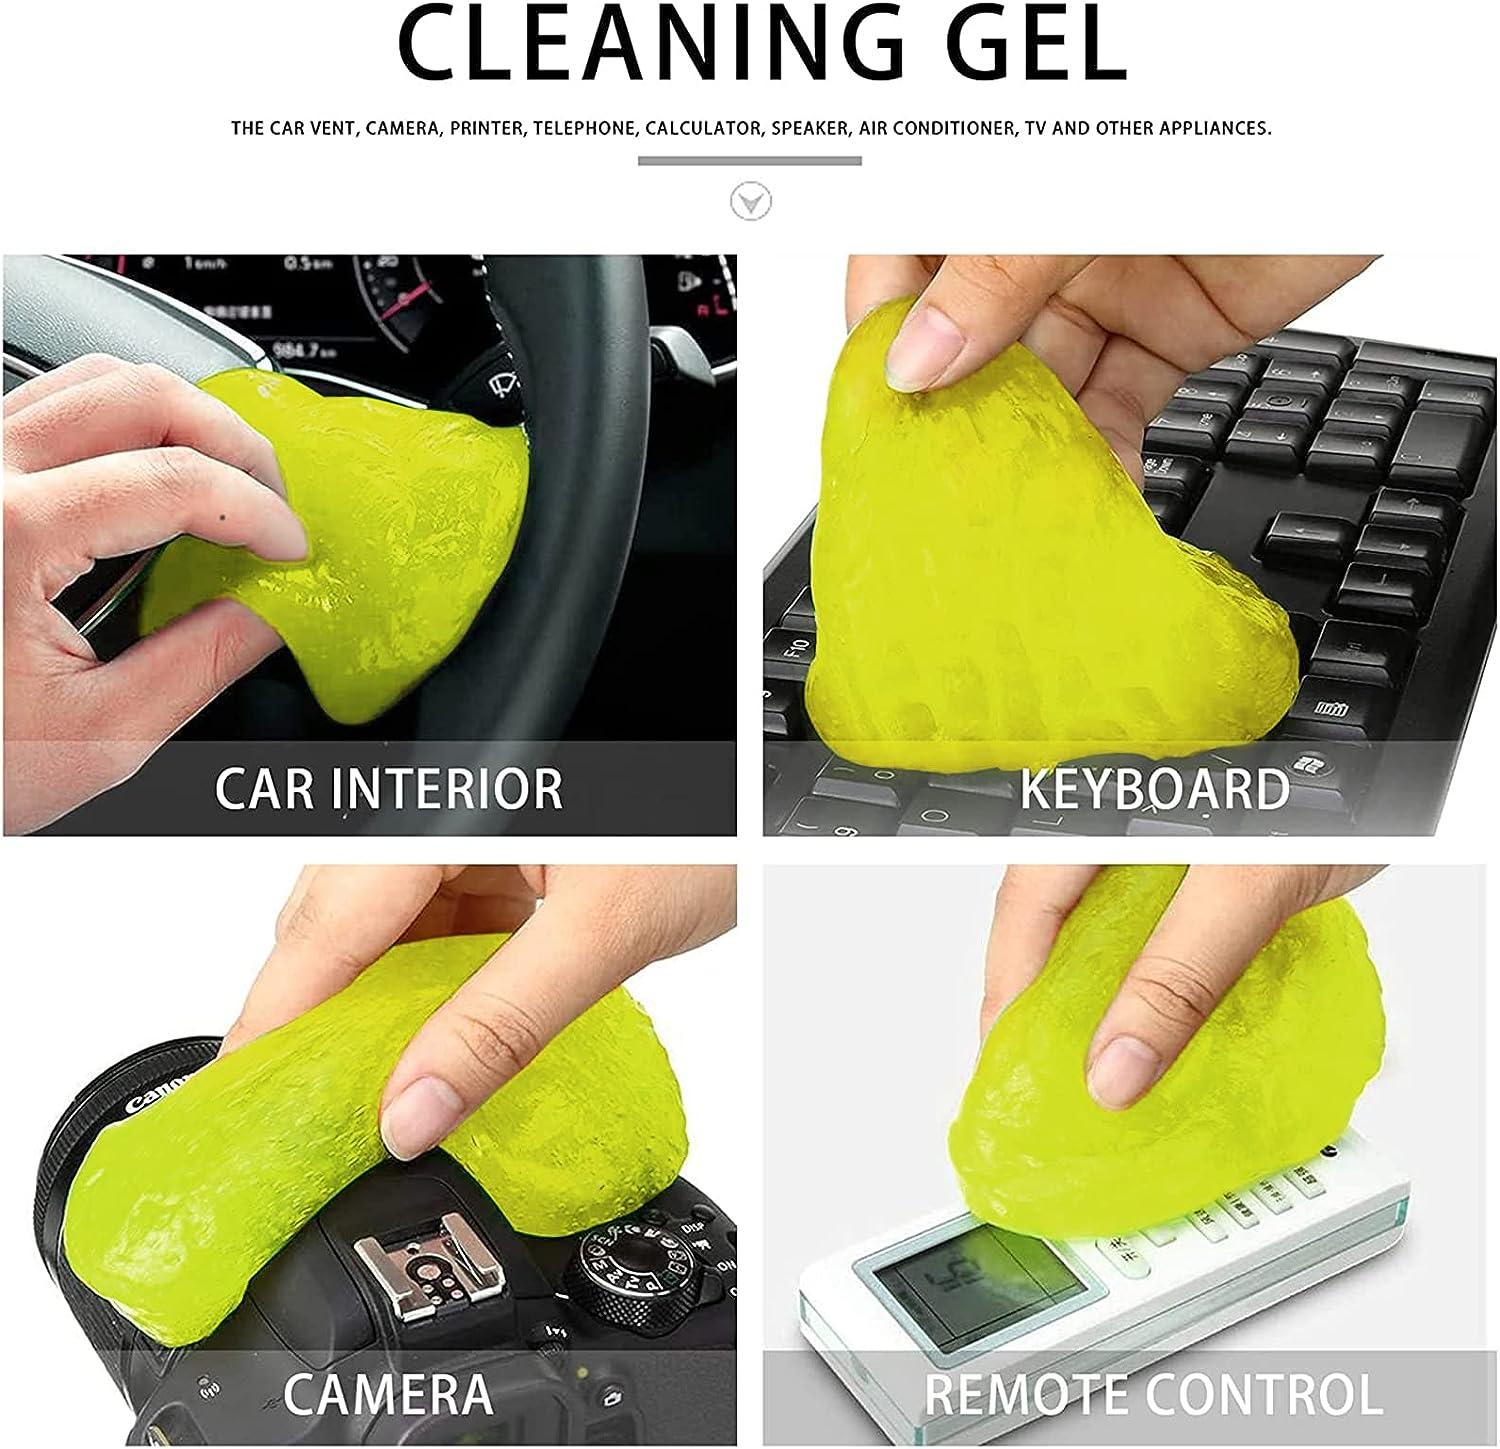 Car Cleaning Kit With Storage Bag Includes Interior Brush, Detail